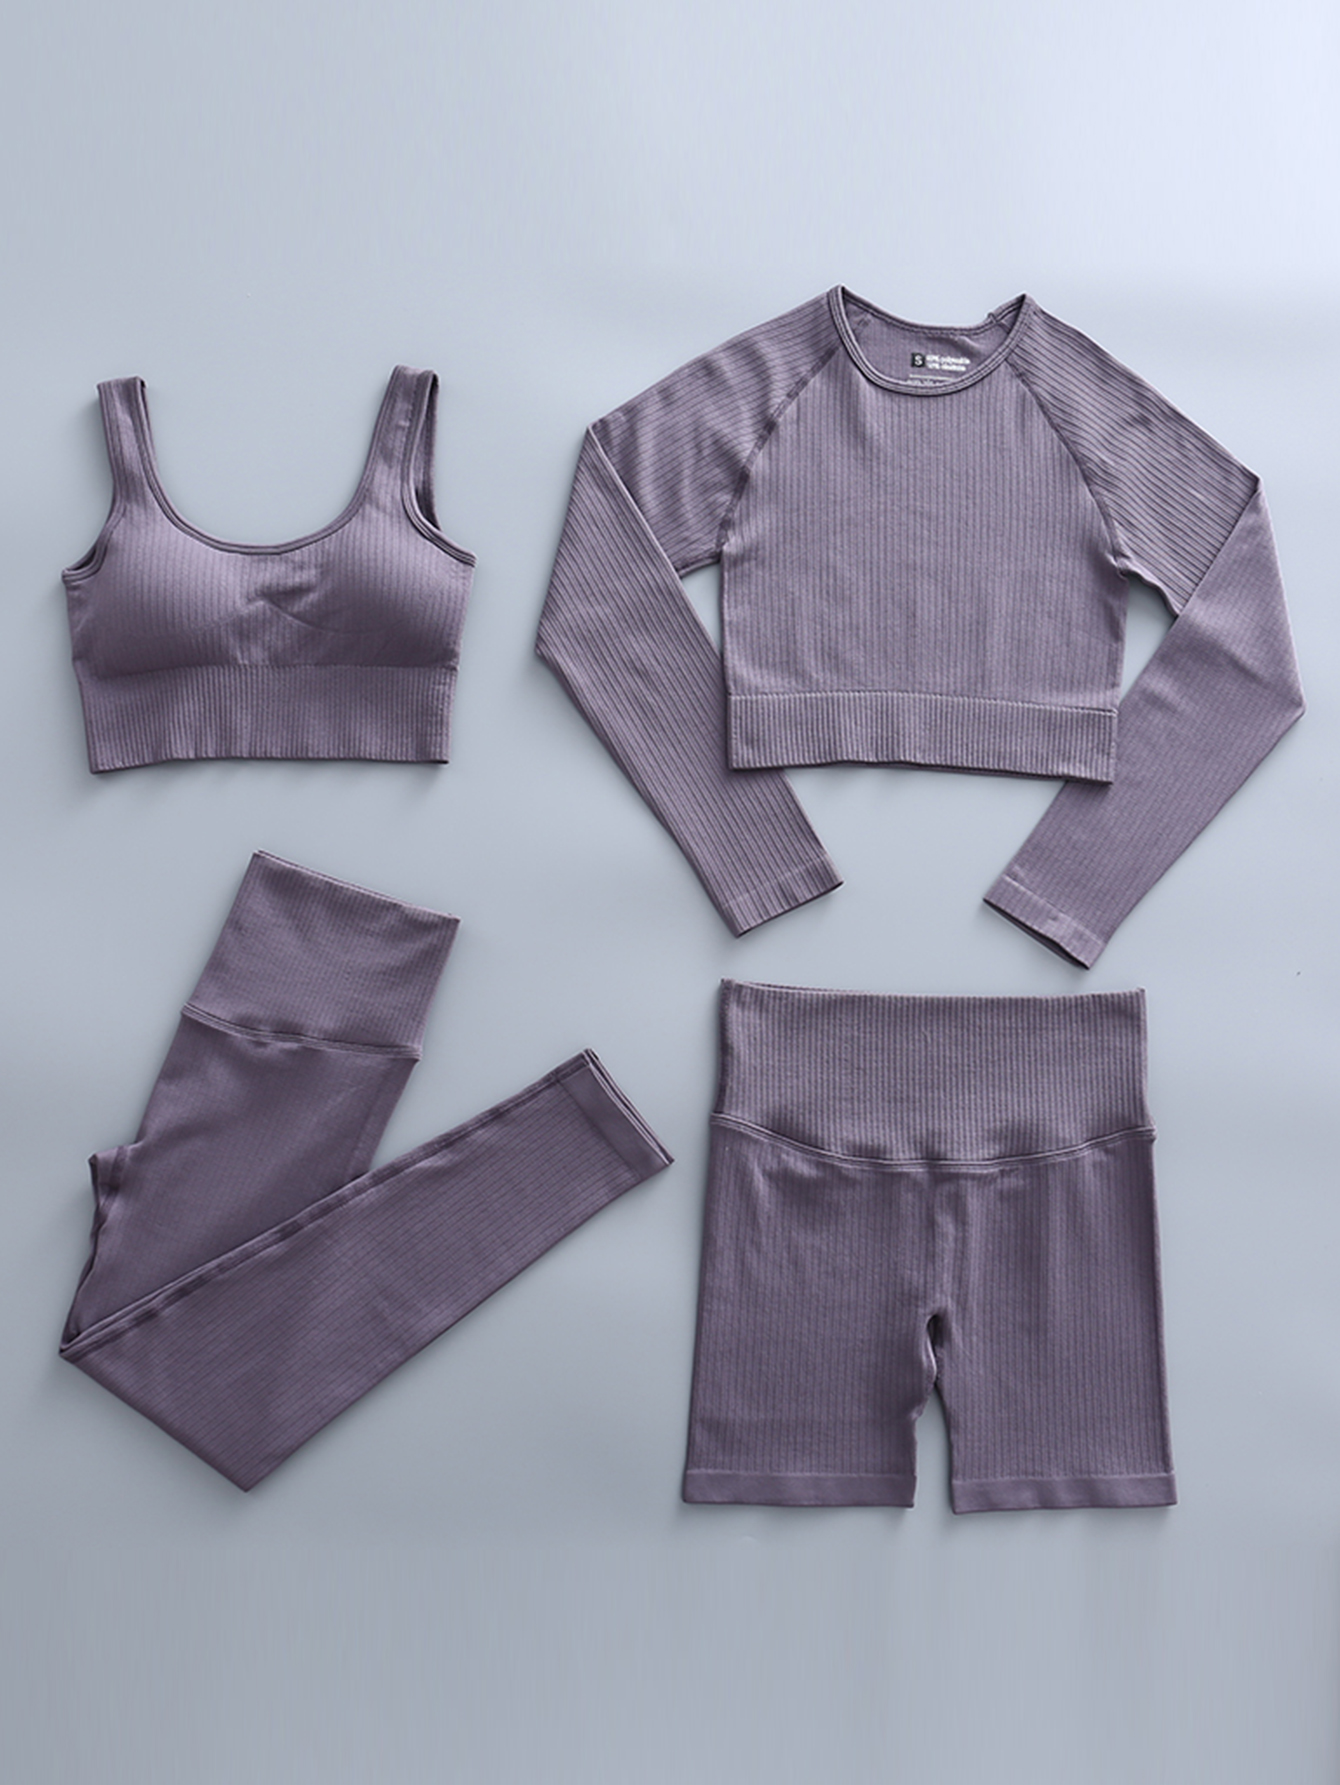 Womens Seamless Yoga Set Crop Top And Short Sleeve Purple Sports Bra For Athletic  Wear, Gym Leggings Included Style X0825 From Official_888_store, $16.18